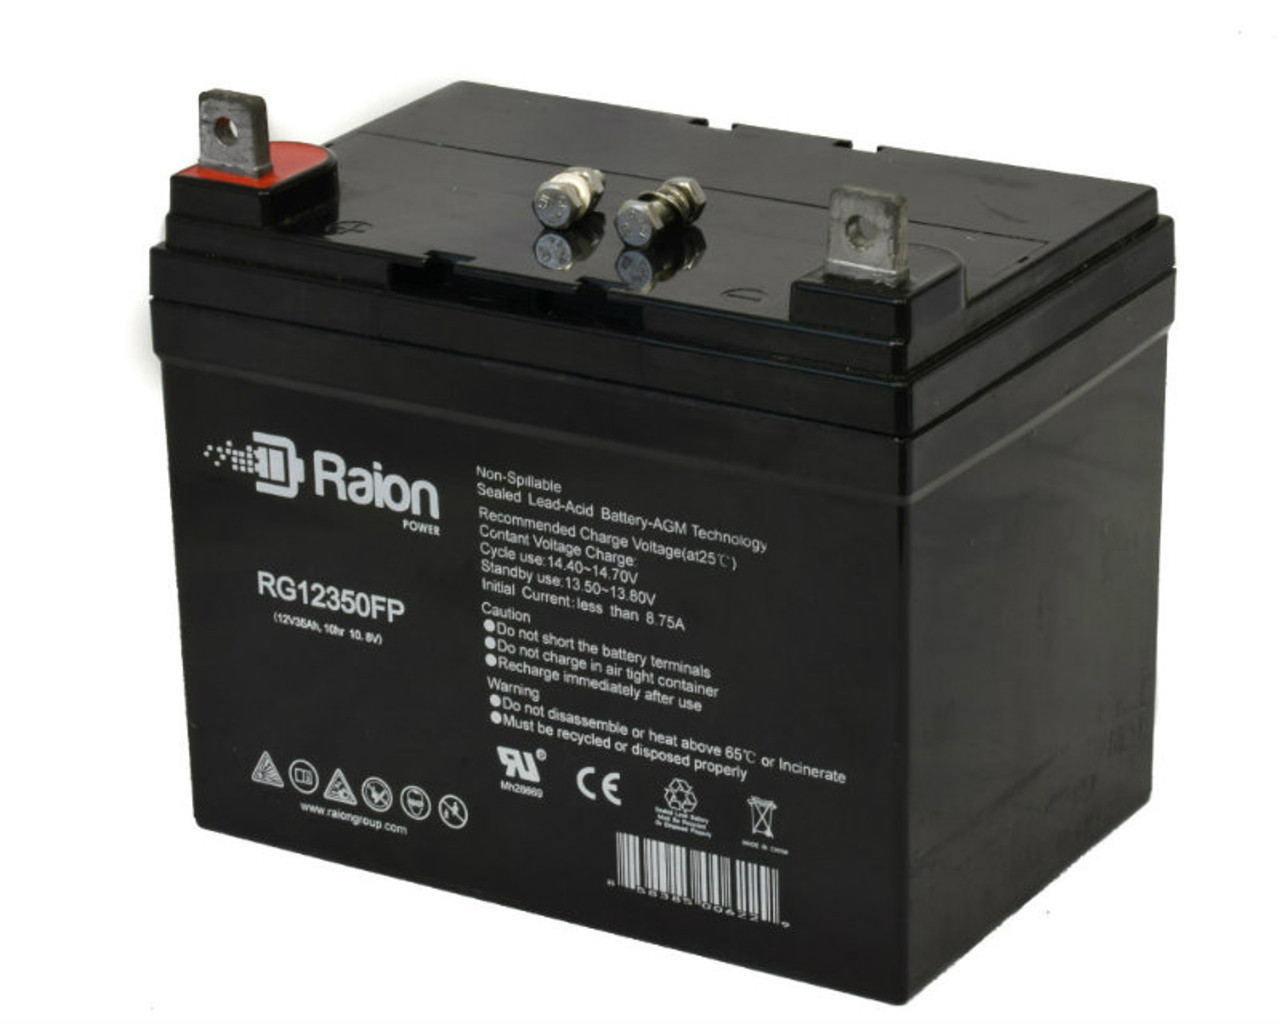 Raion Power Replacement 12V 35Ah RG12350FP Battery for Vectral 11.5HP 30"